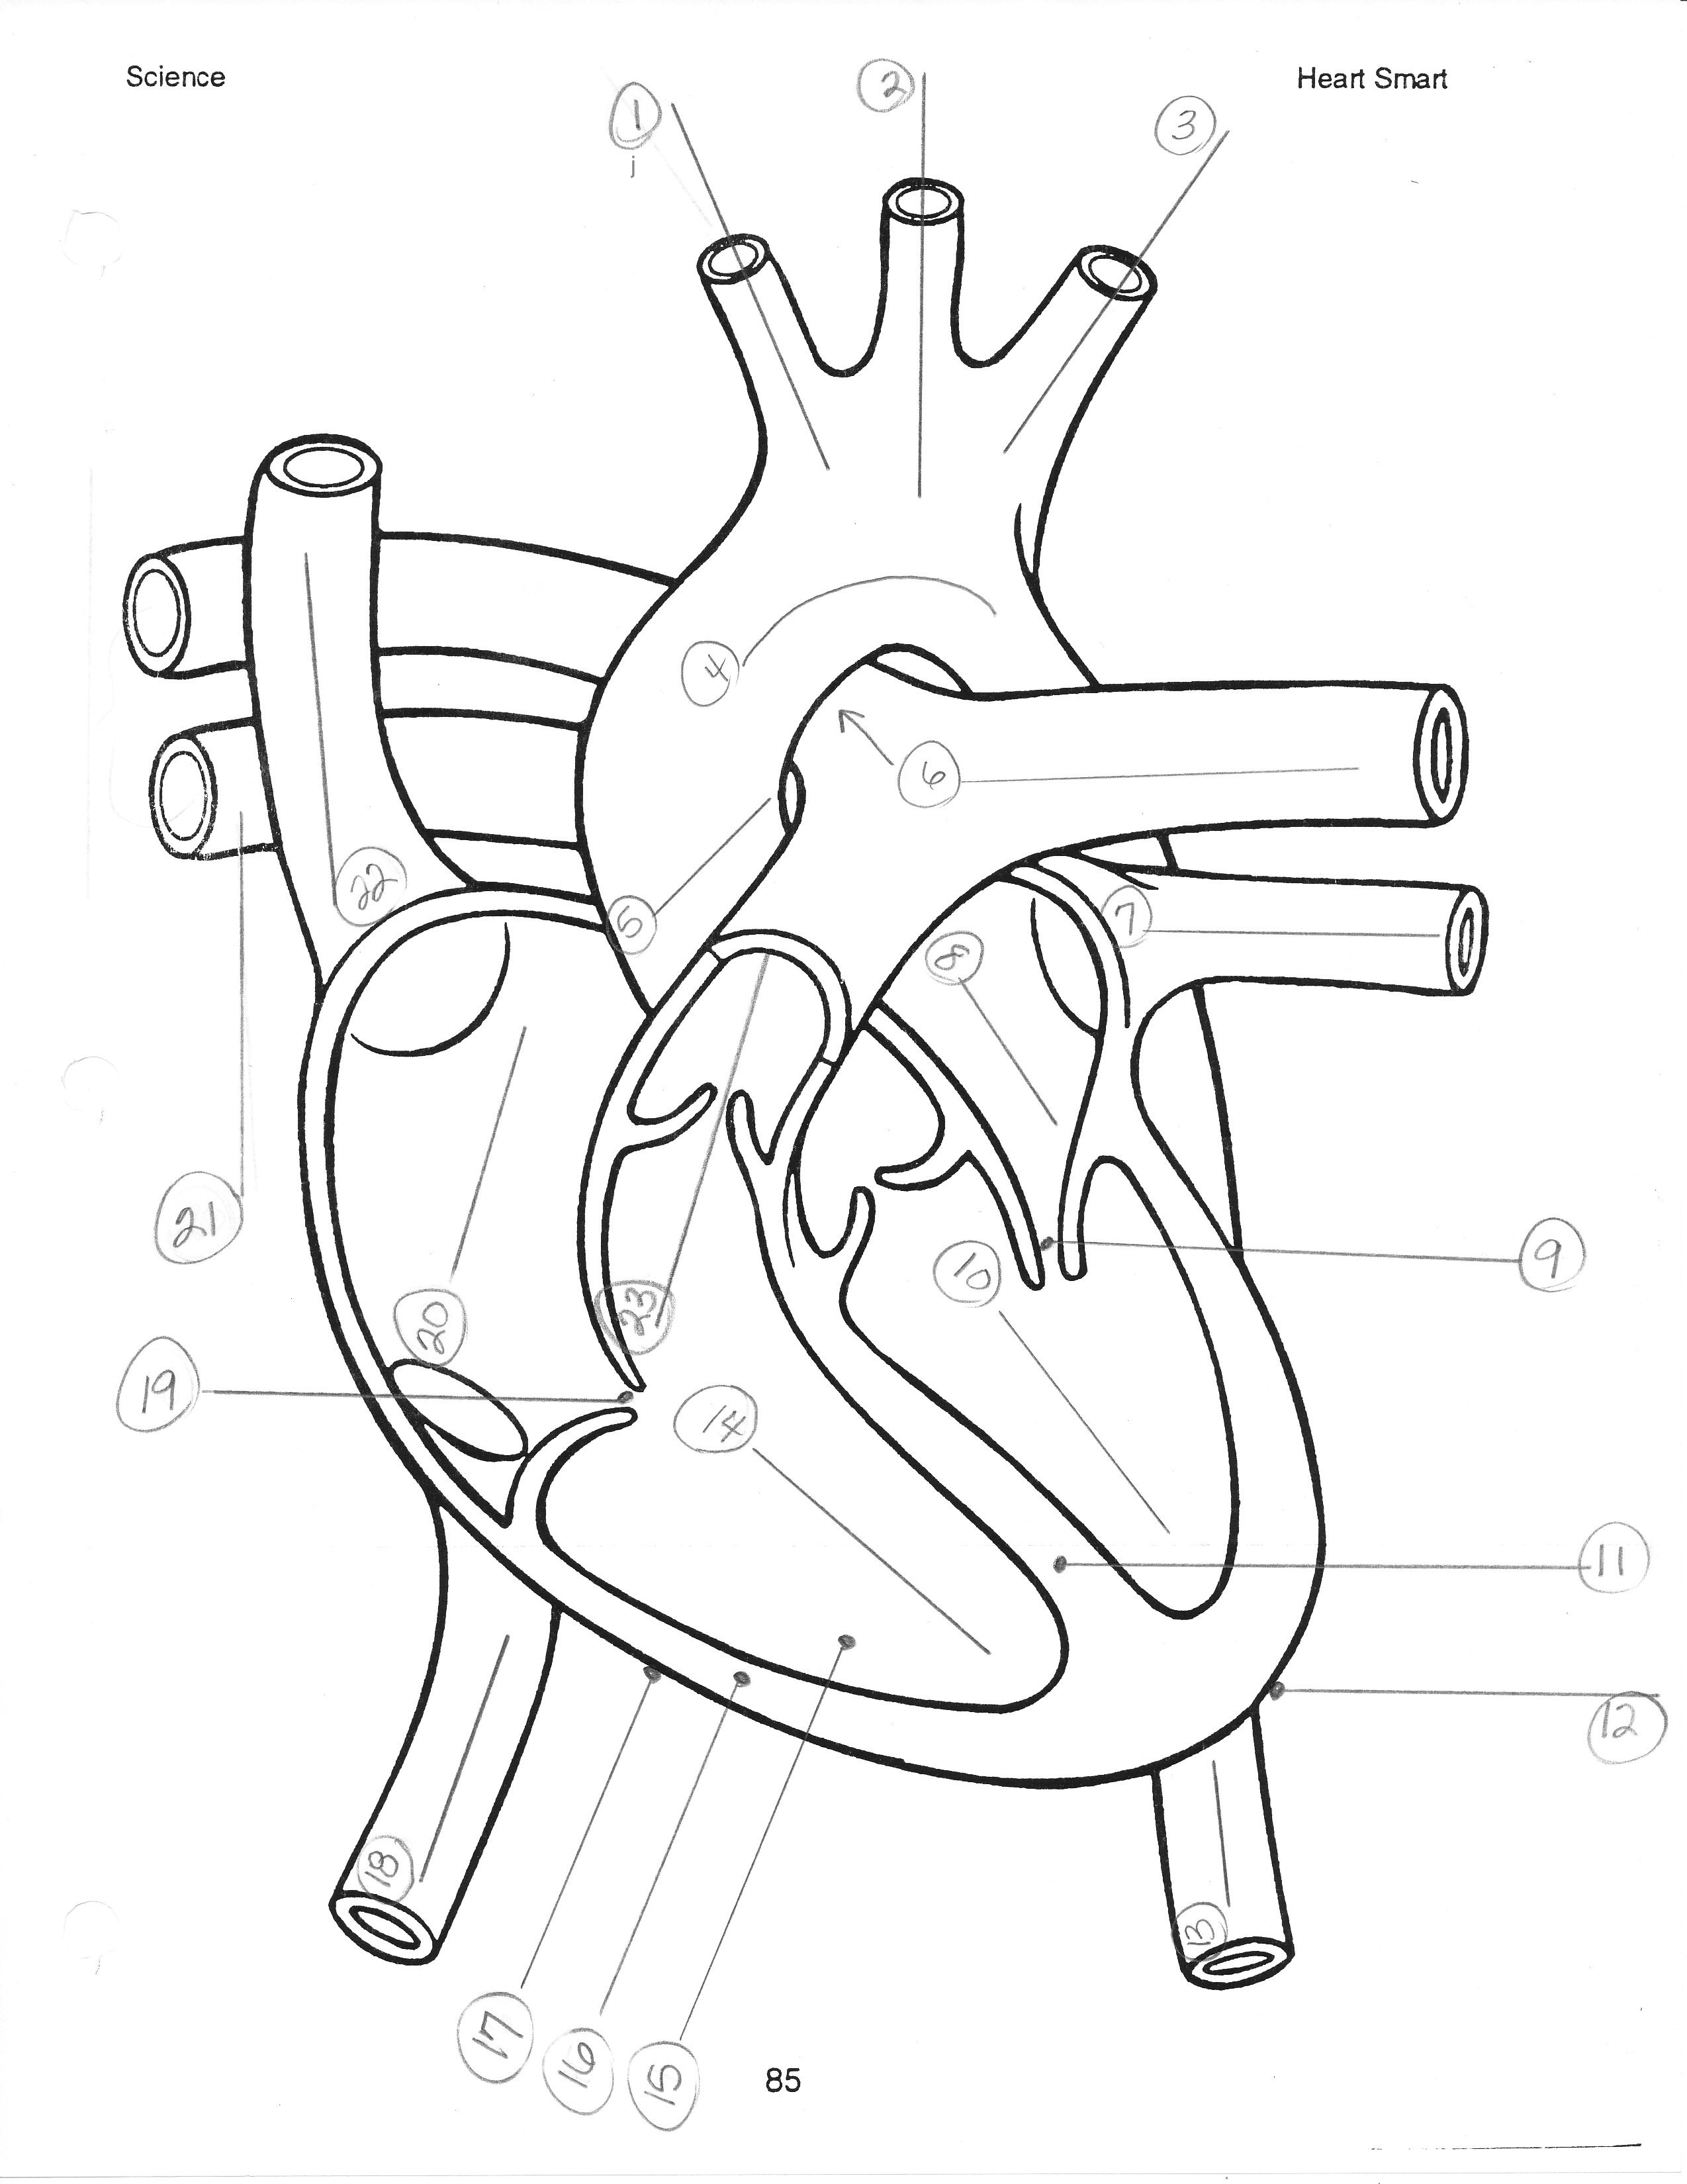 Labeled Drawing Of The Heart at GetDrawings Free download